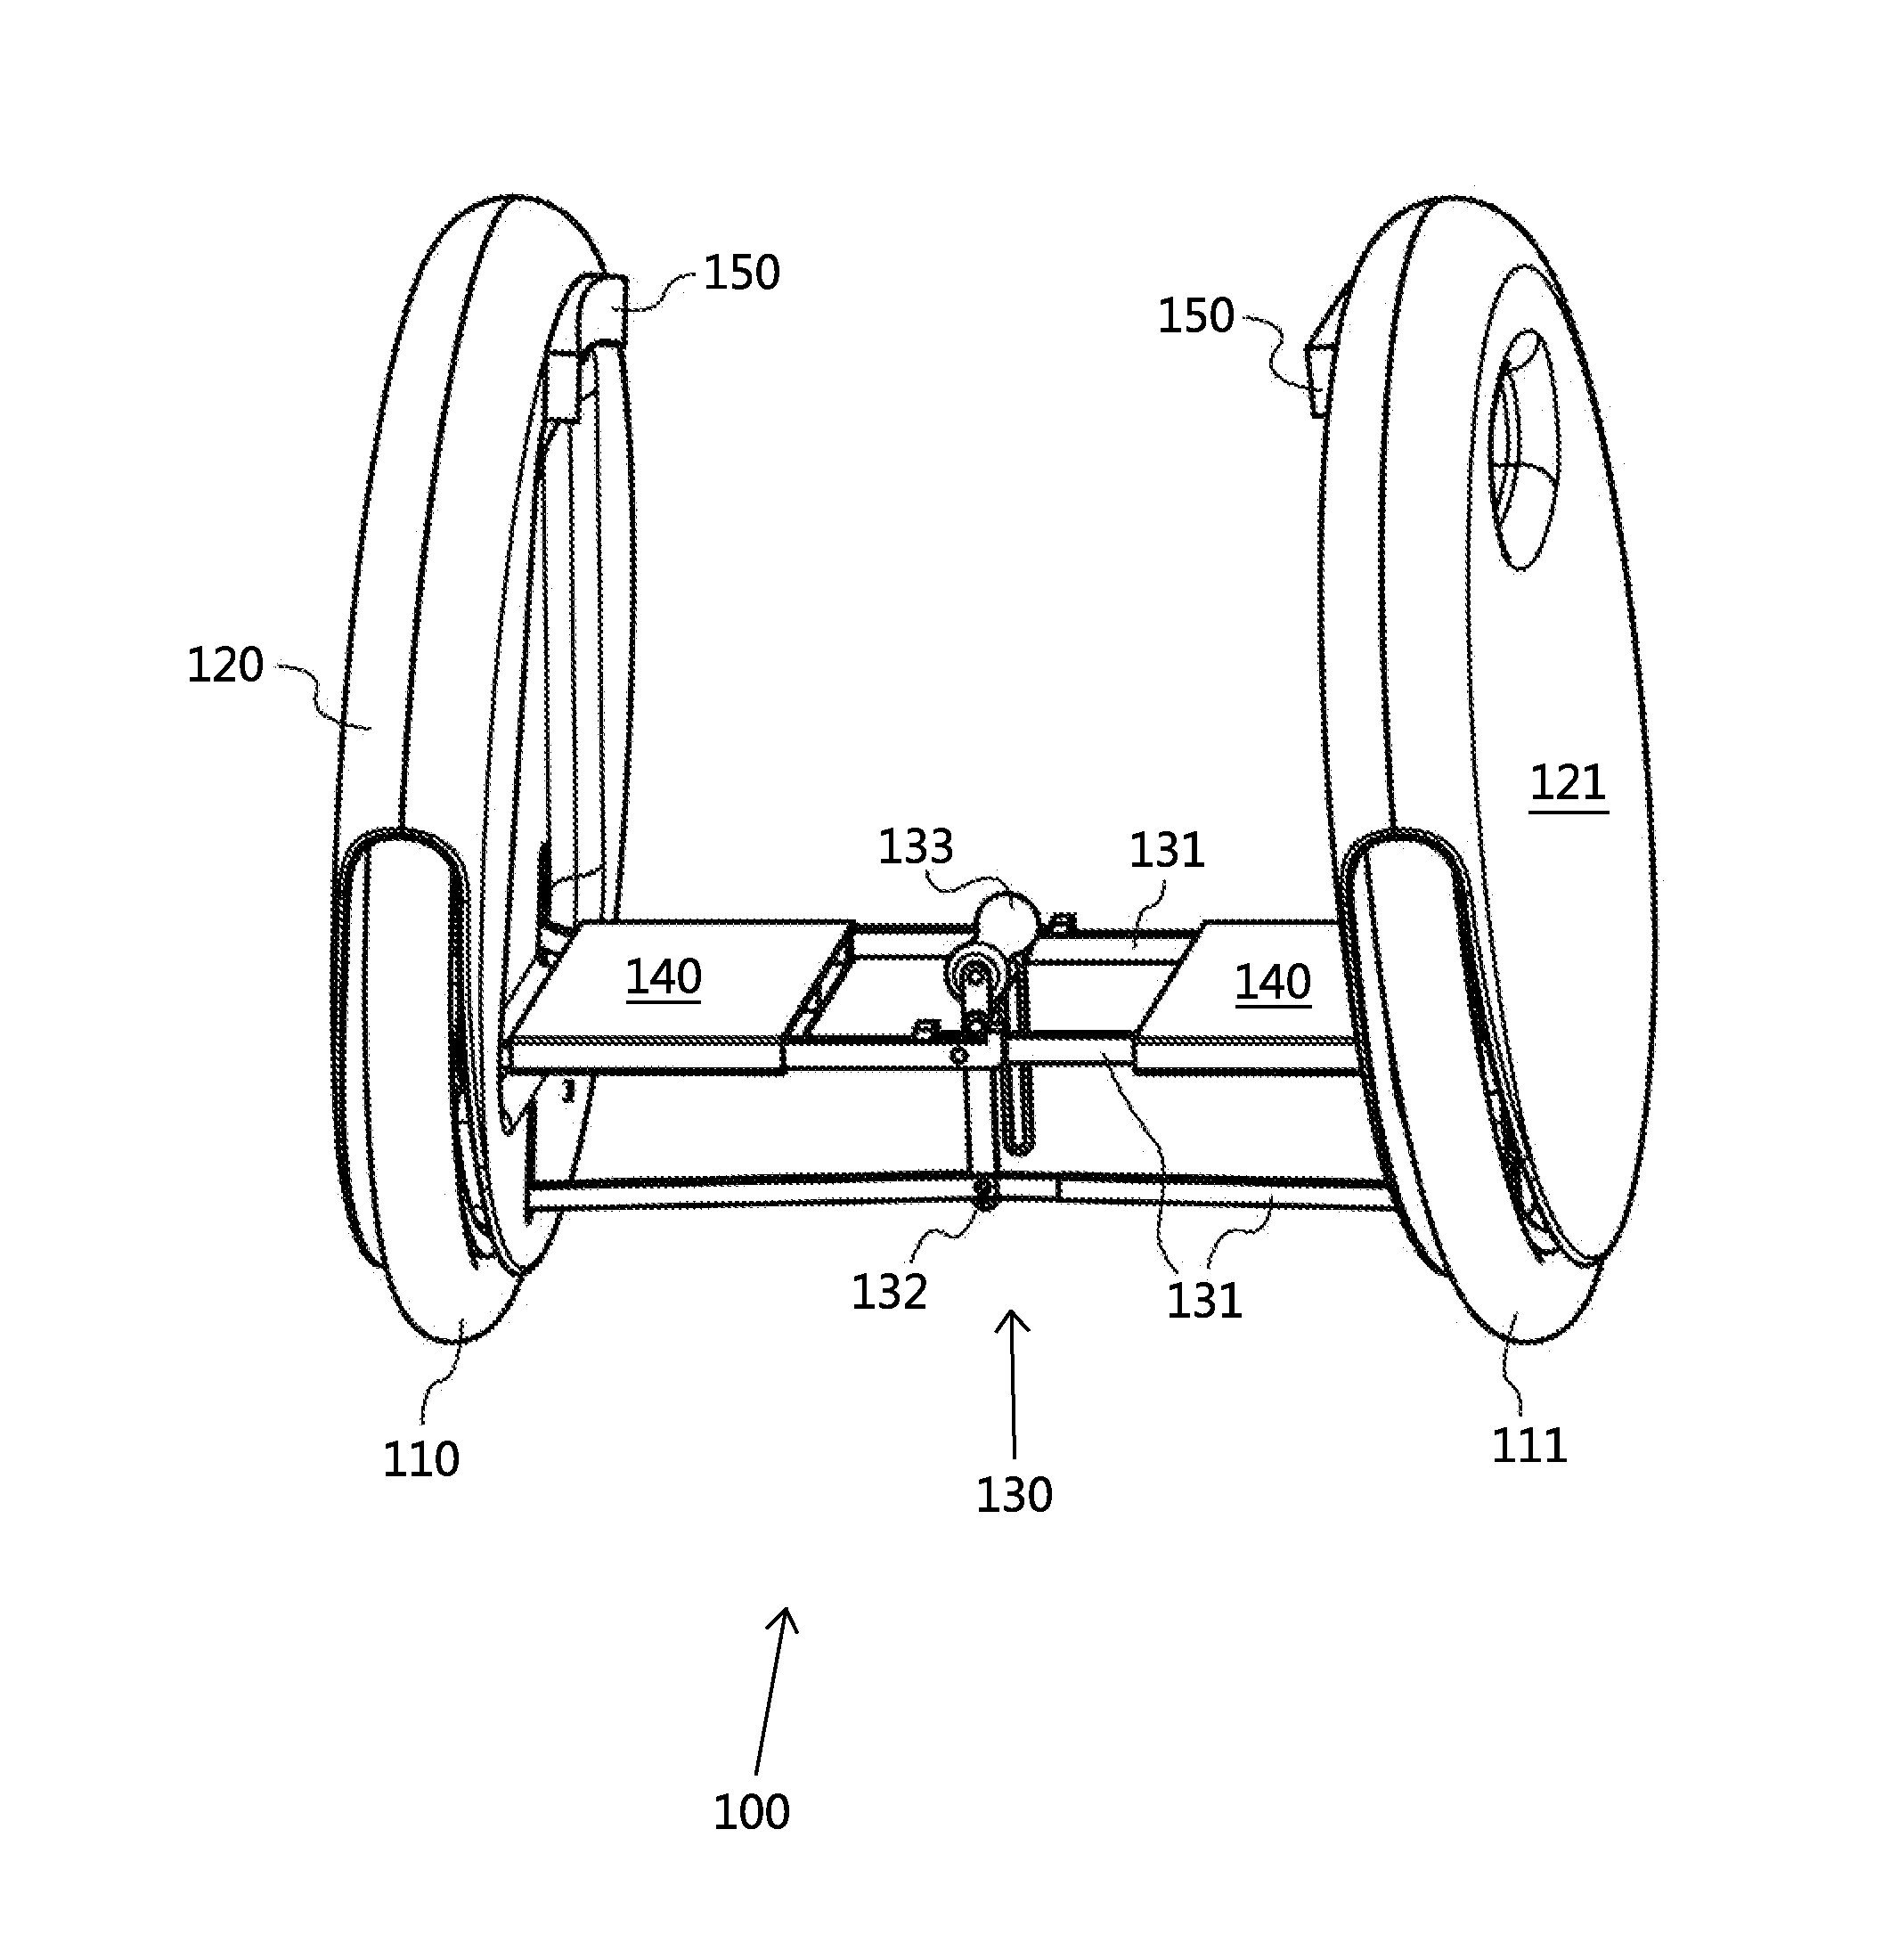 Two-wheeled self-balancing motorized personal vehicle with tilting wheels